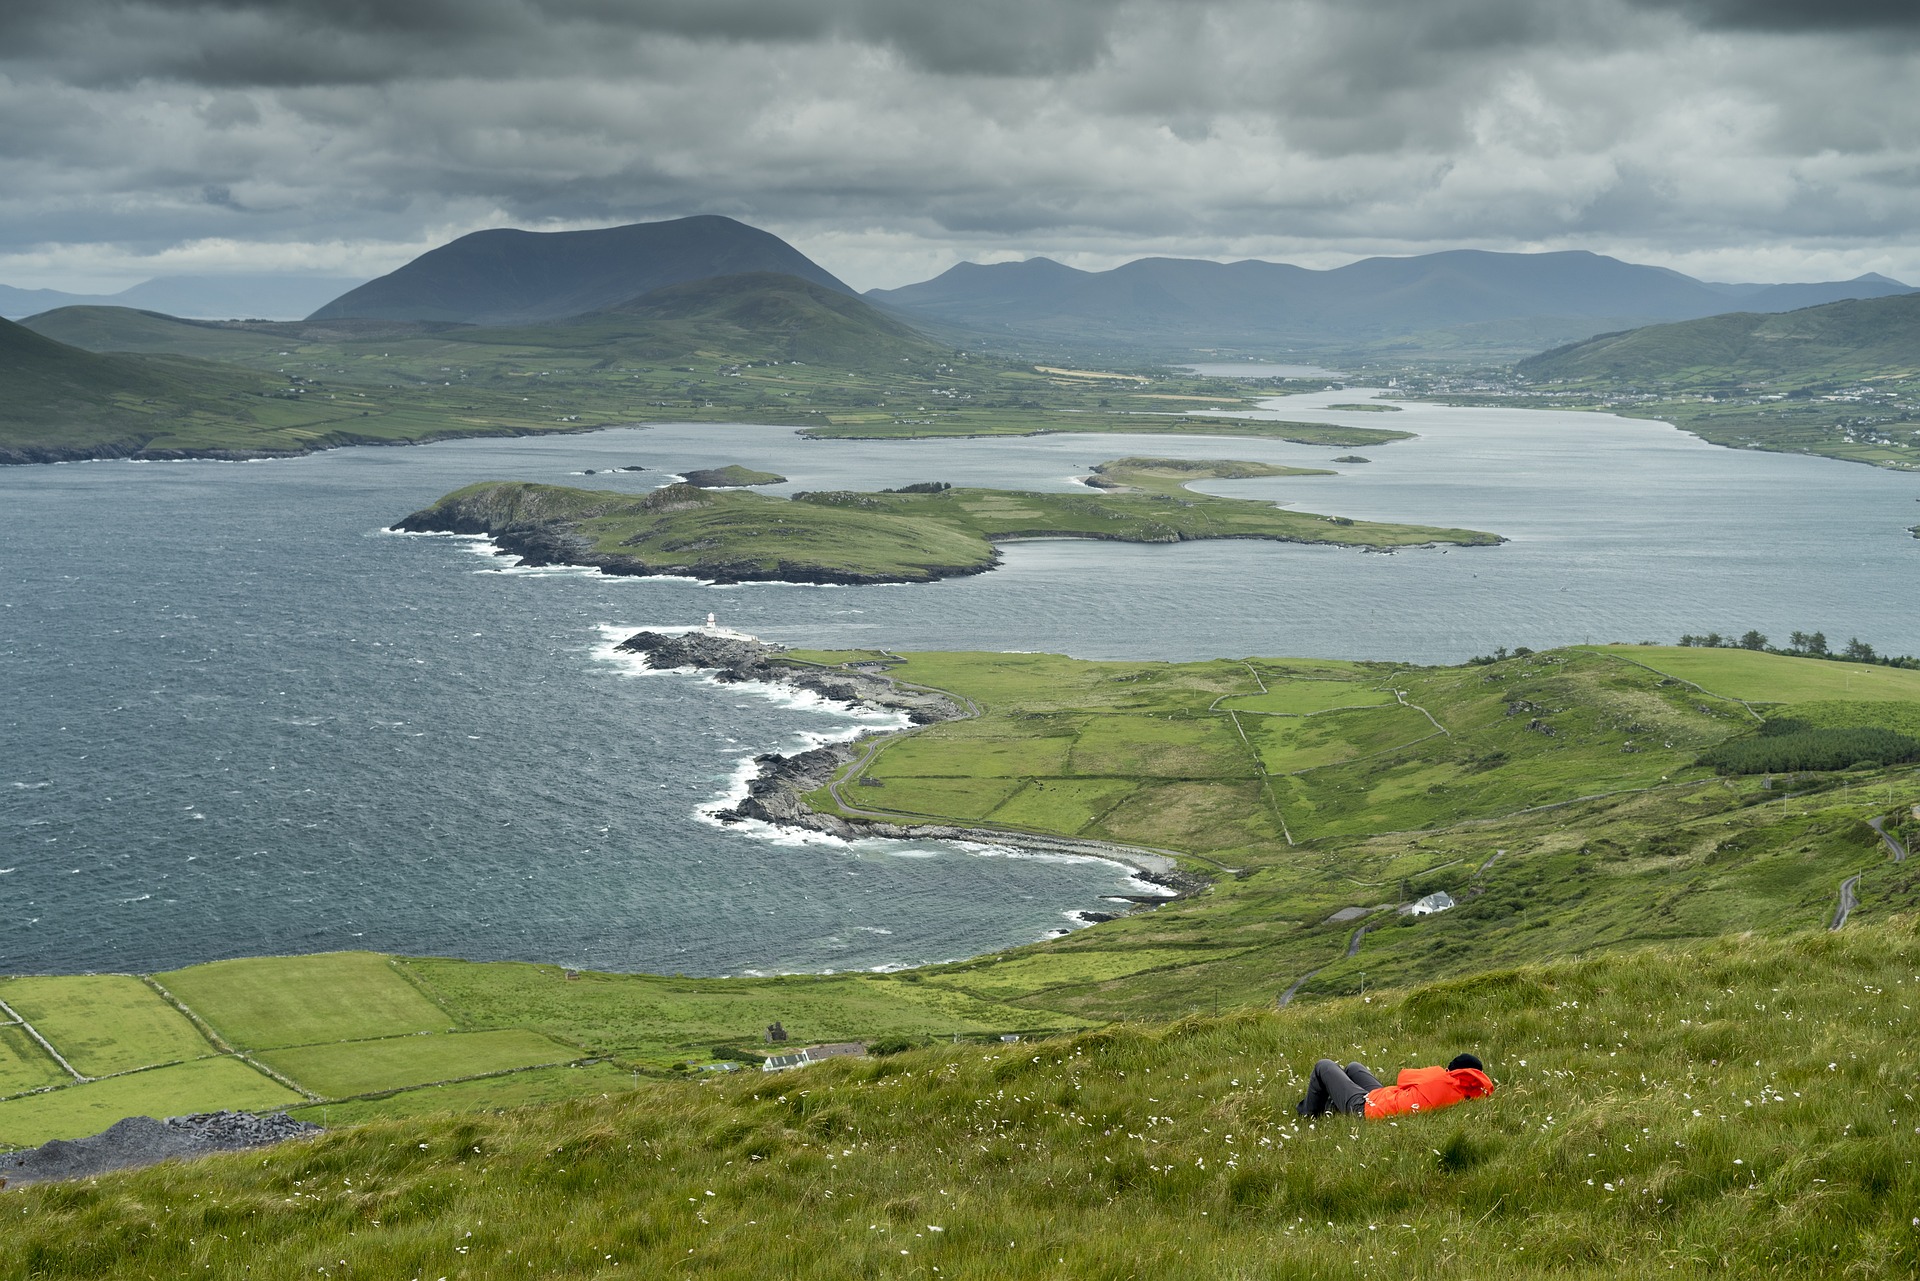 A hiker laying in the grass with a scenic view in Ireland